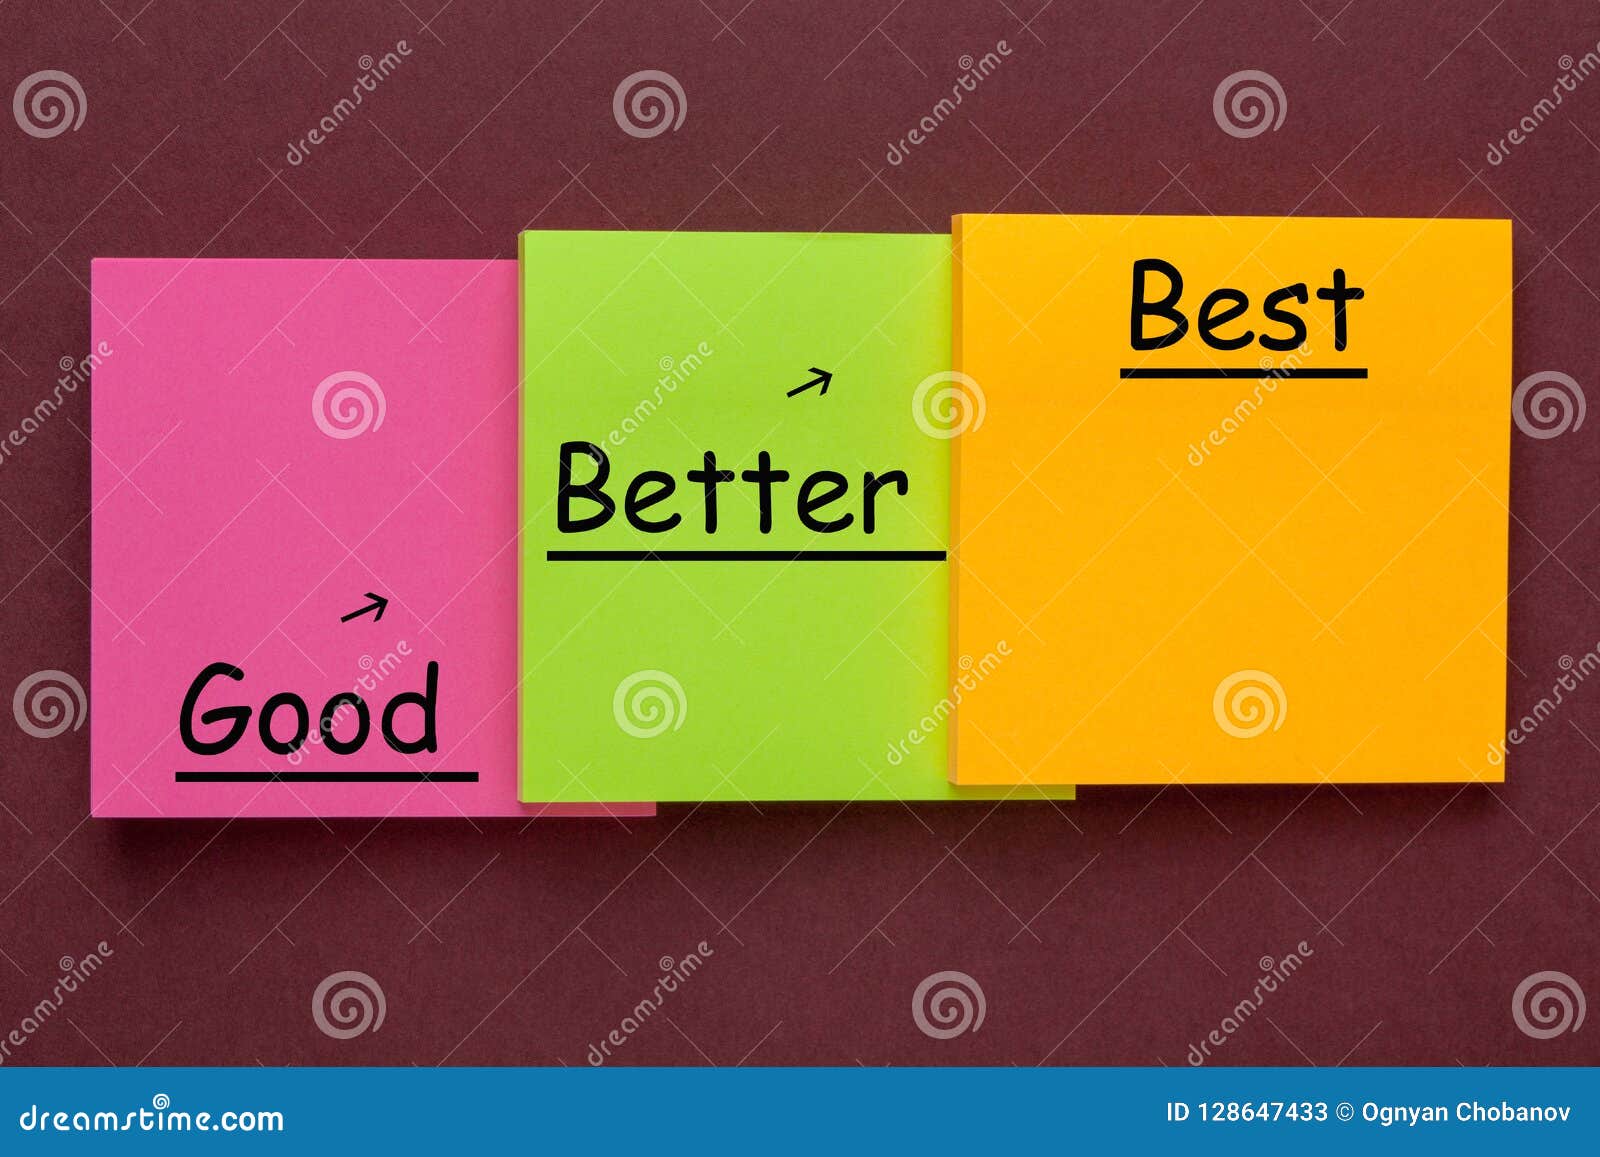 More well или better. Английский good - beter -the best. Good well разница. Better the best. Good well best.